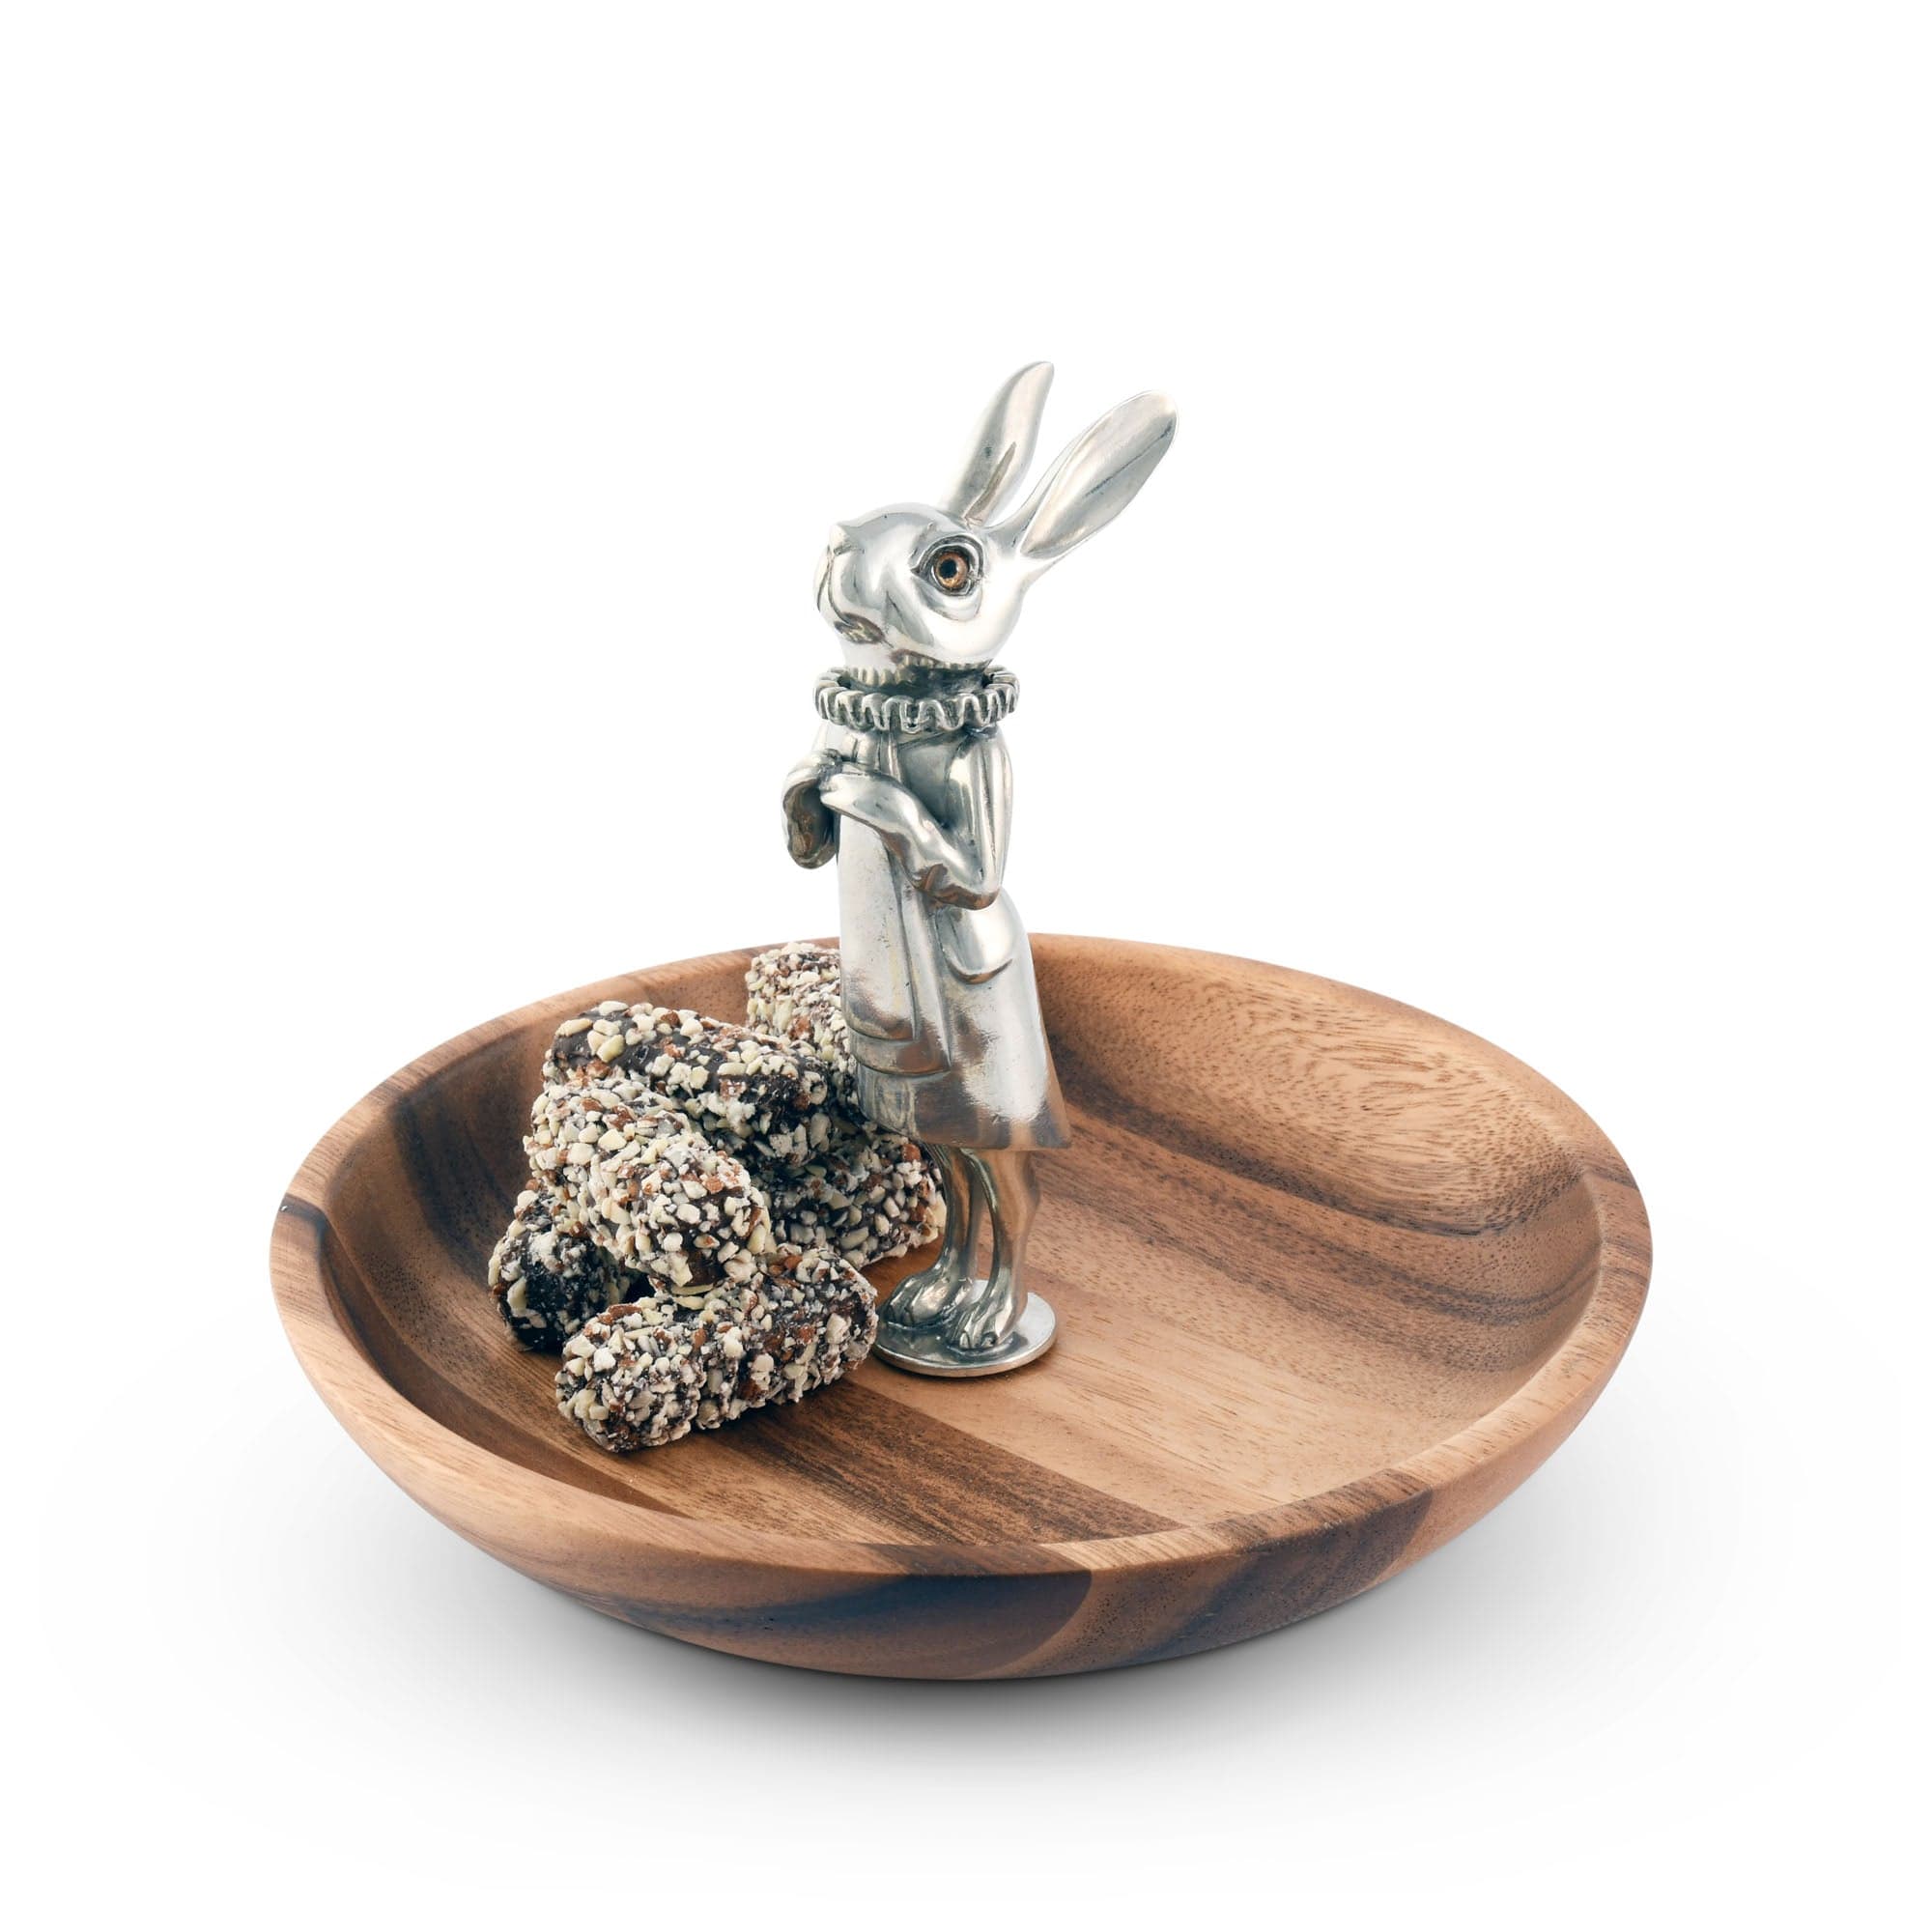 Kitchen Boa, bunny with blue bow – GrammaD